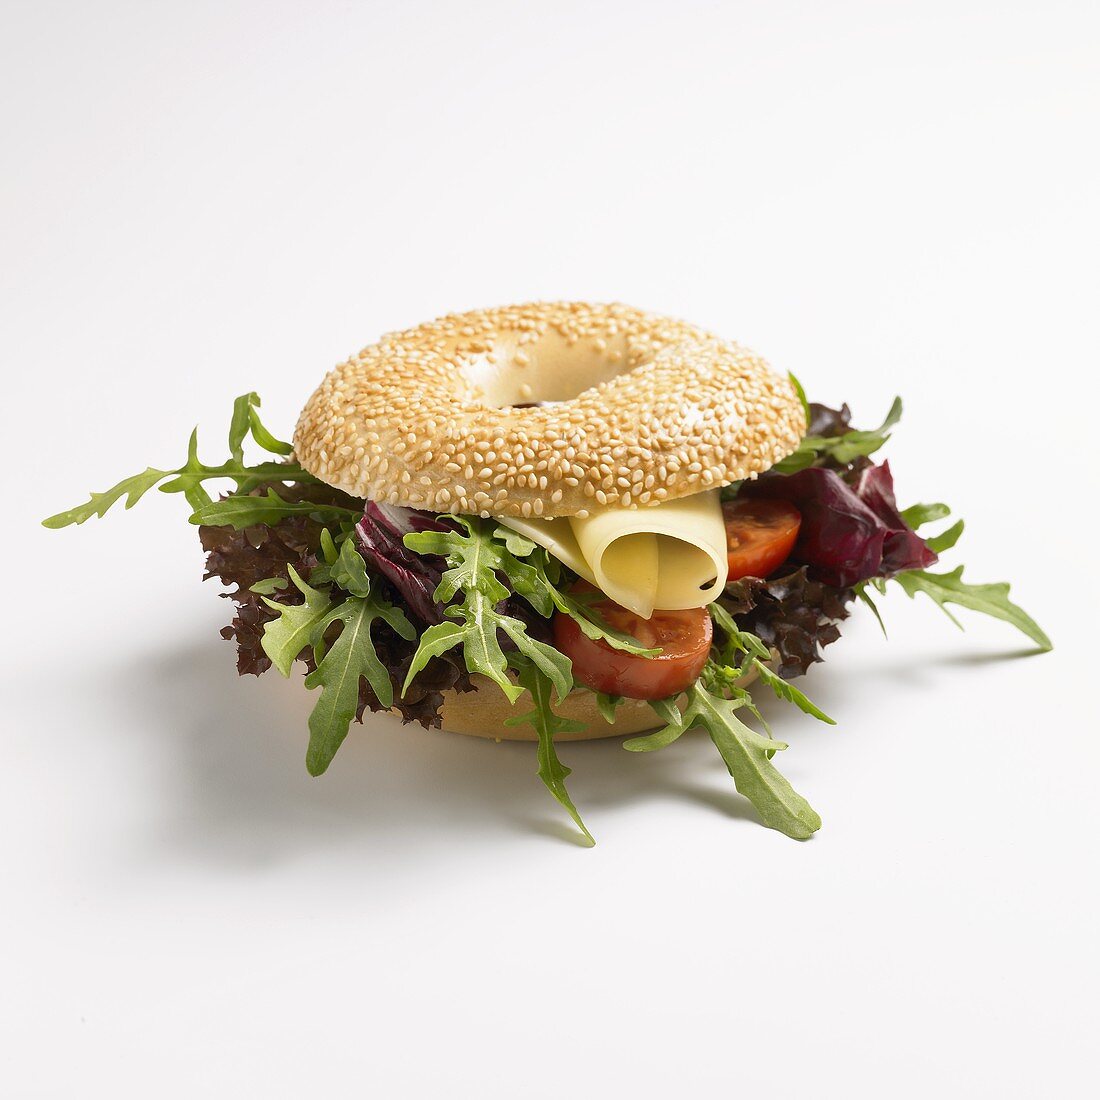 Cheese and salad bagel